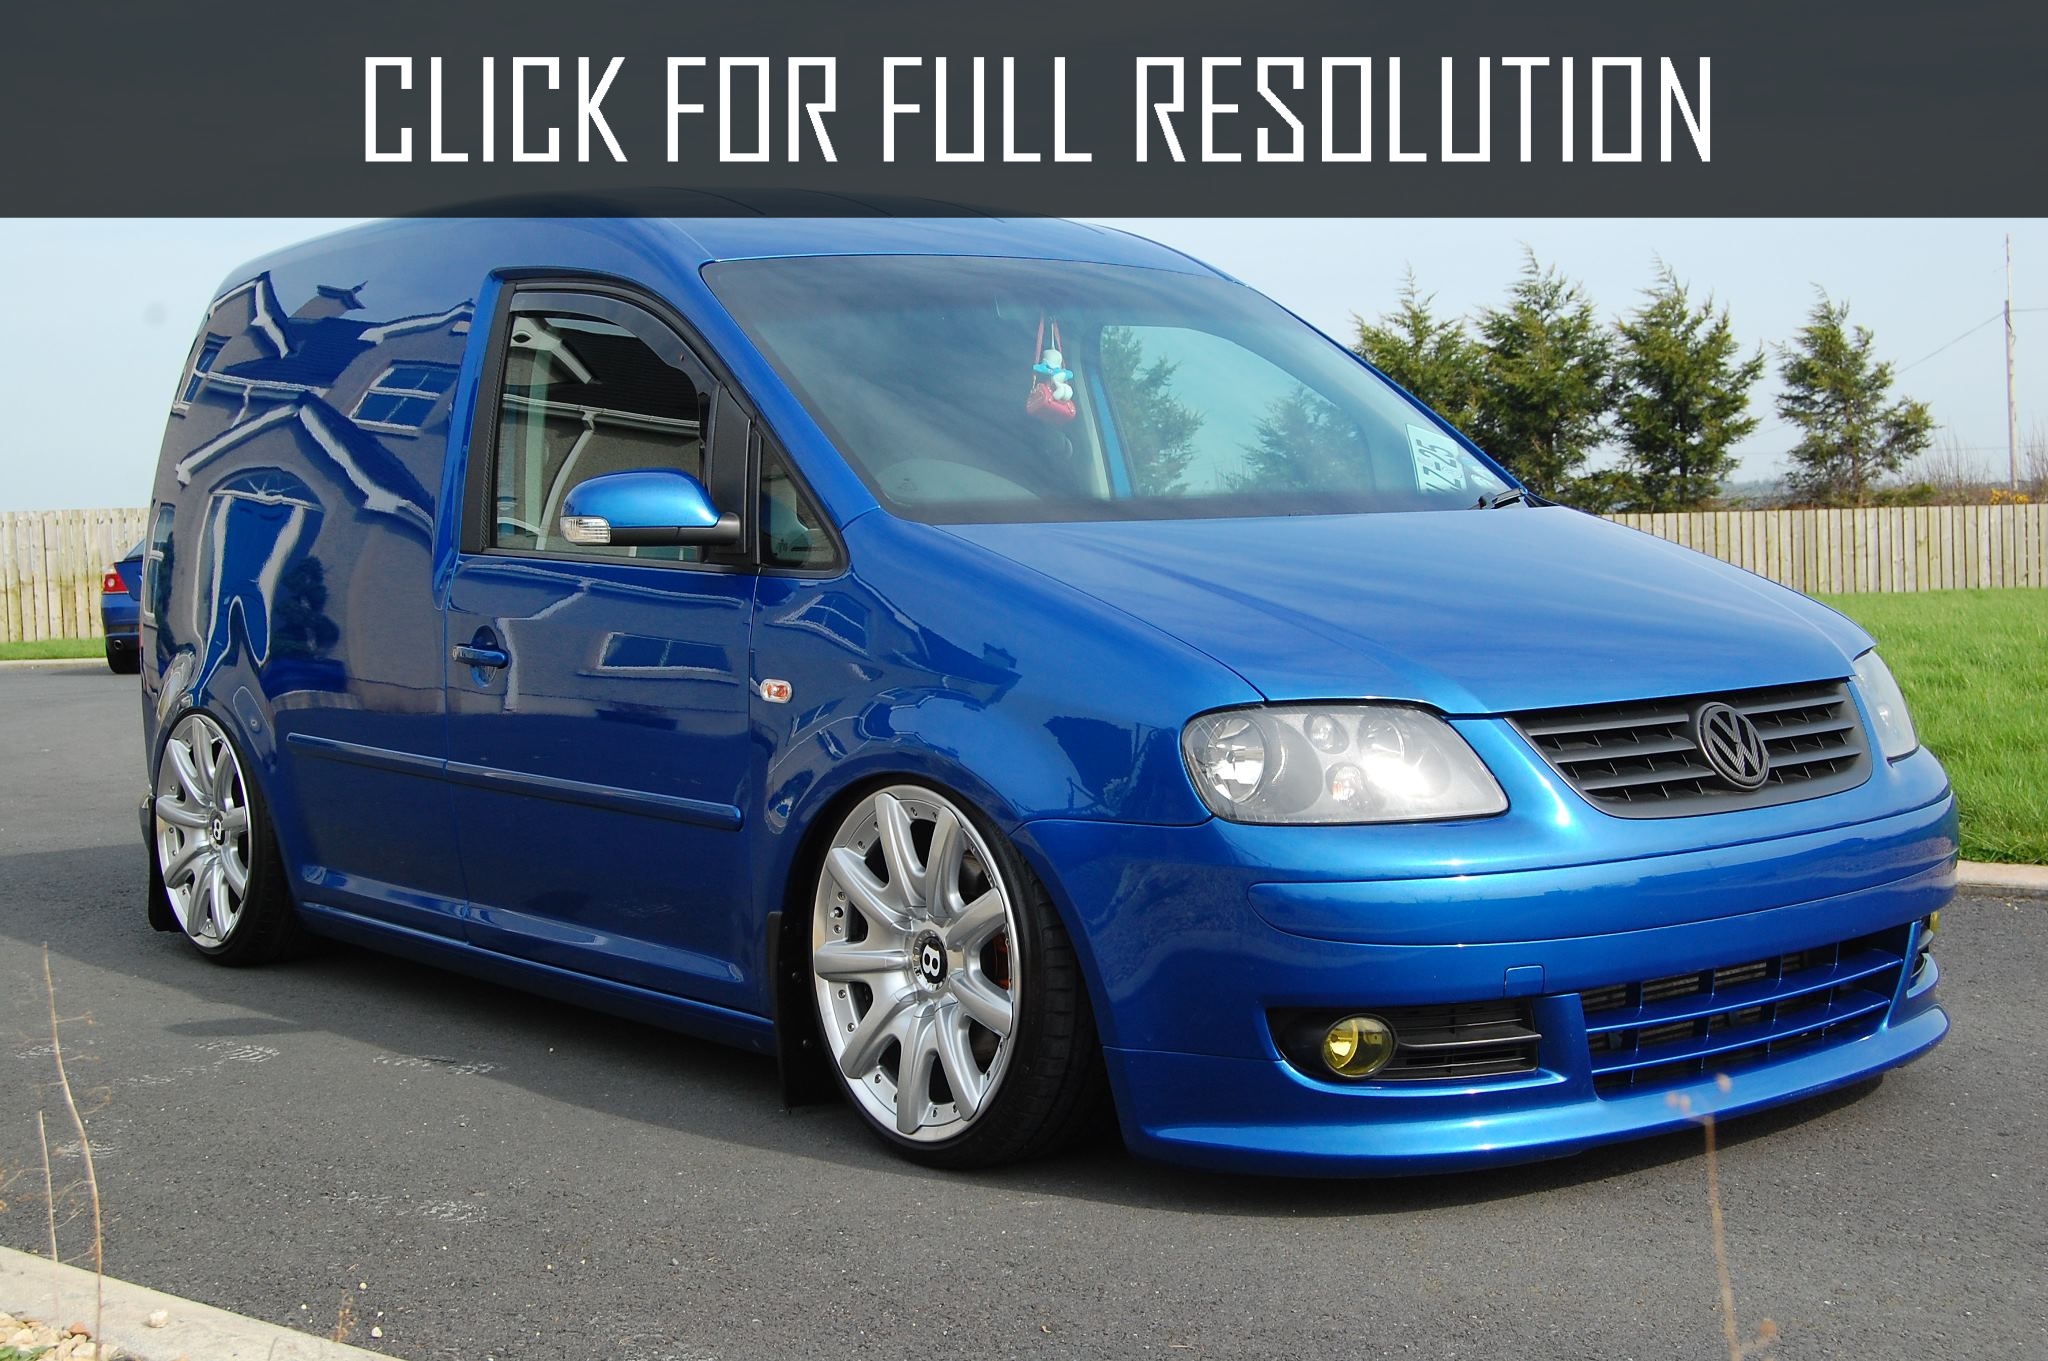 Volkswagen Caddy Modified amazing photo gallery, some information and